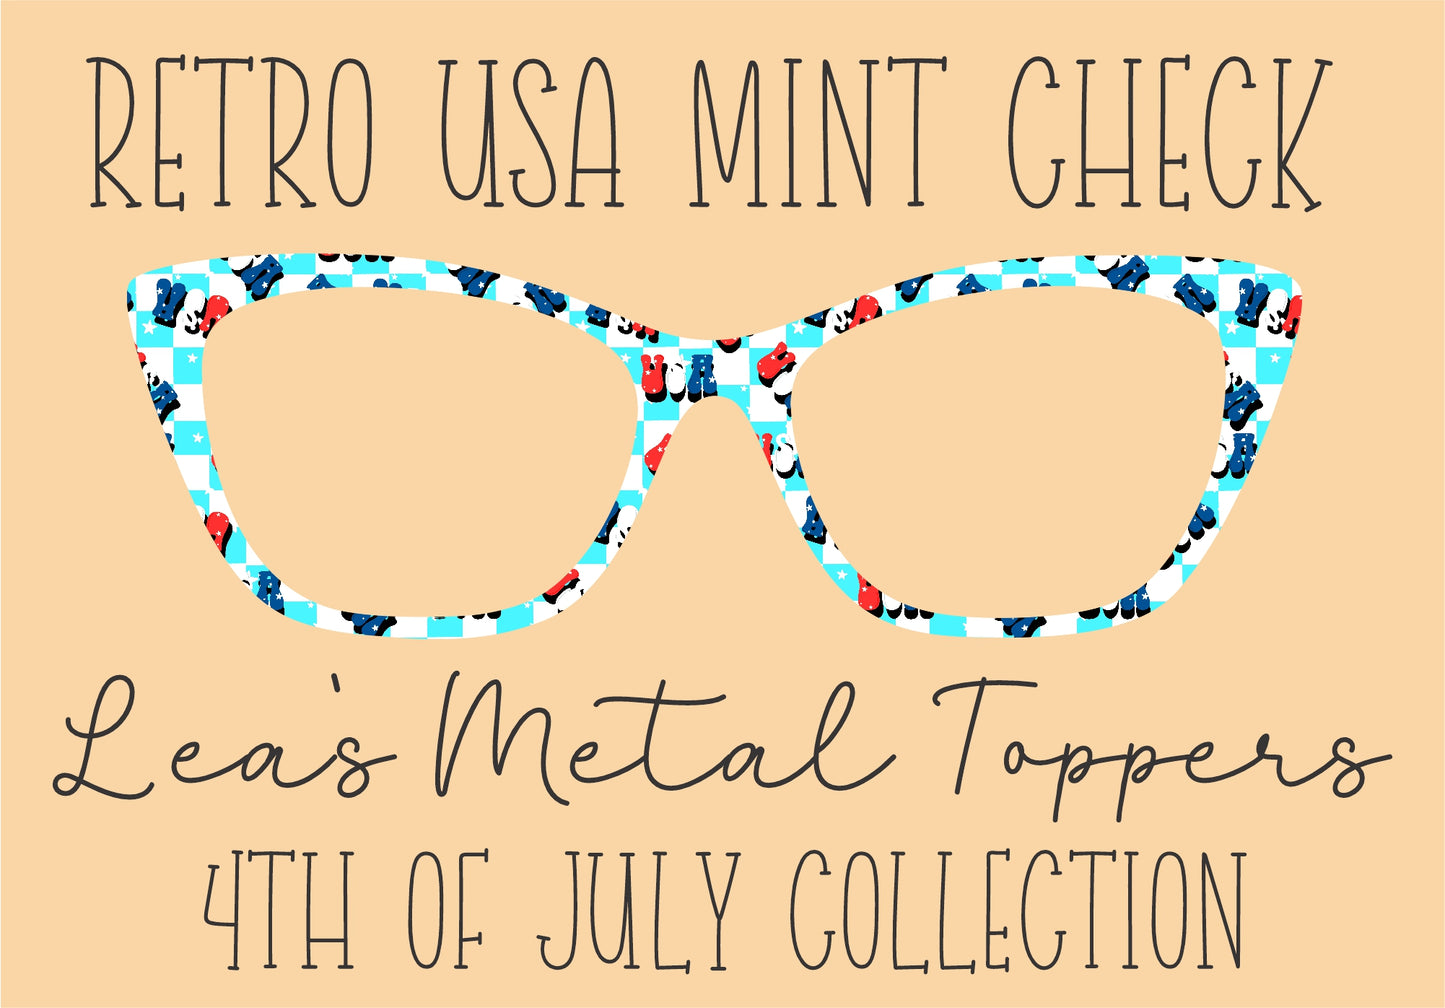 RETRO USA MINT CHECK Eyewear Frame Toppers COMES WITH MAGNETS